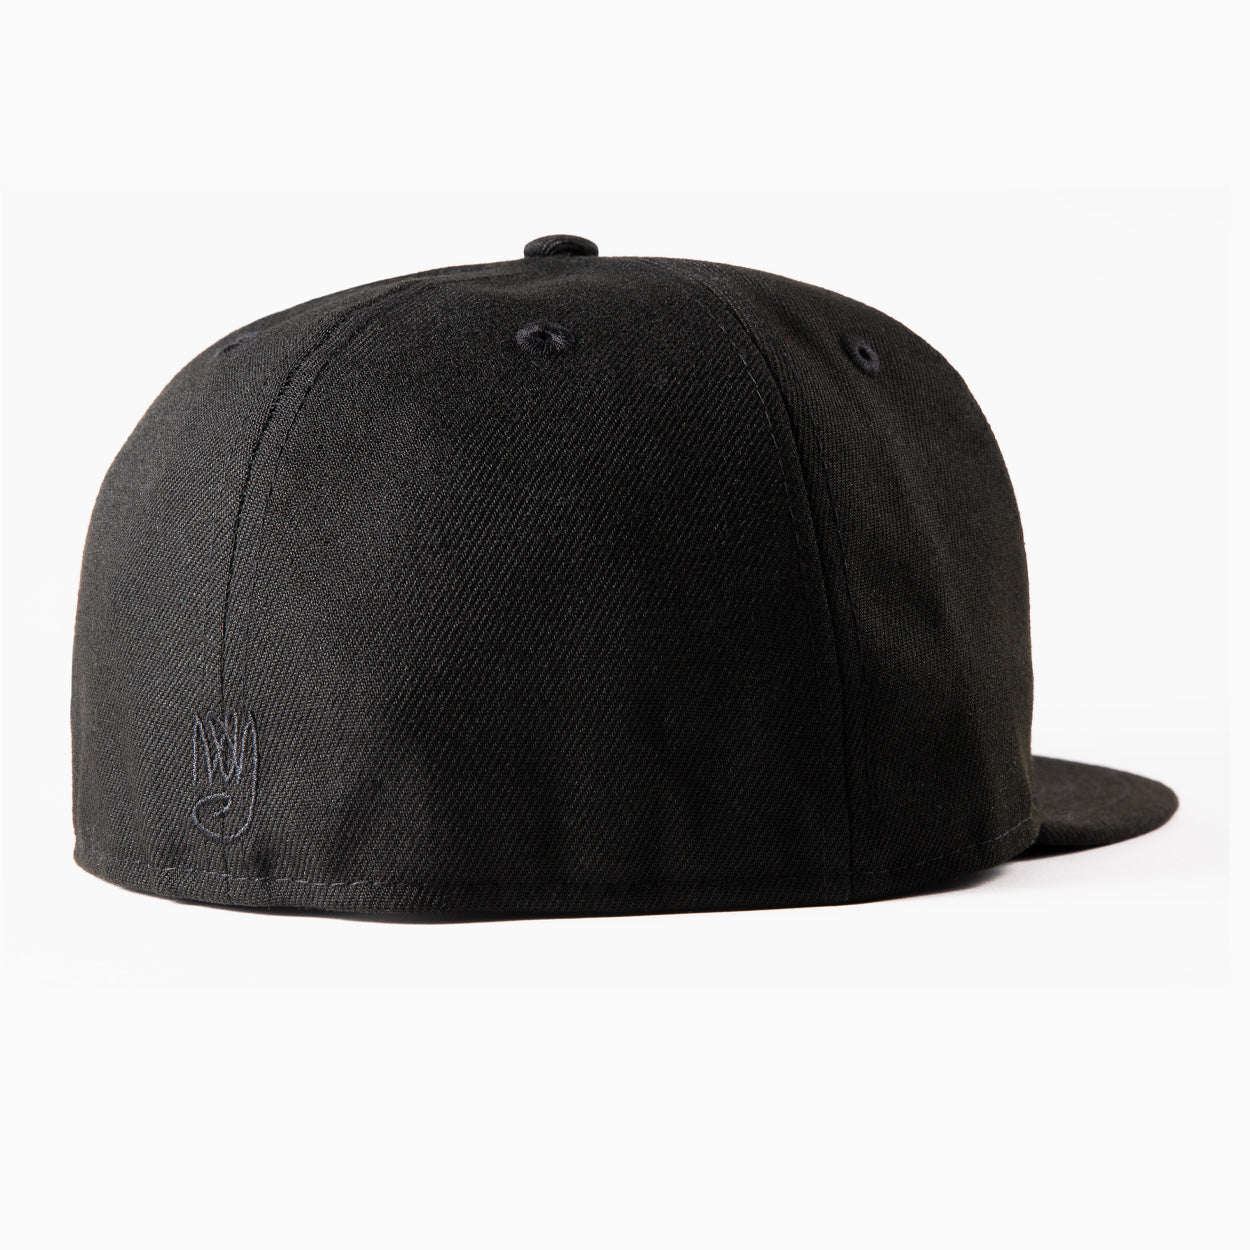 All Black New Era Fitted